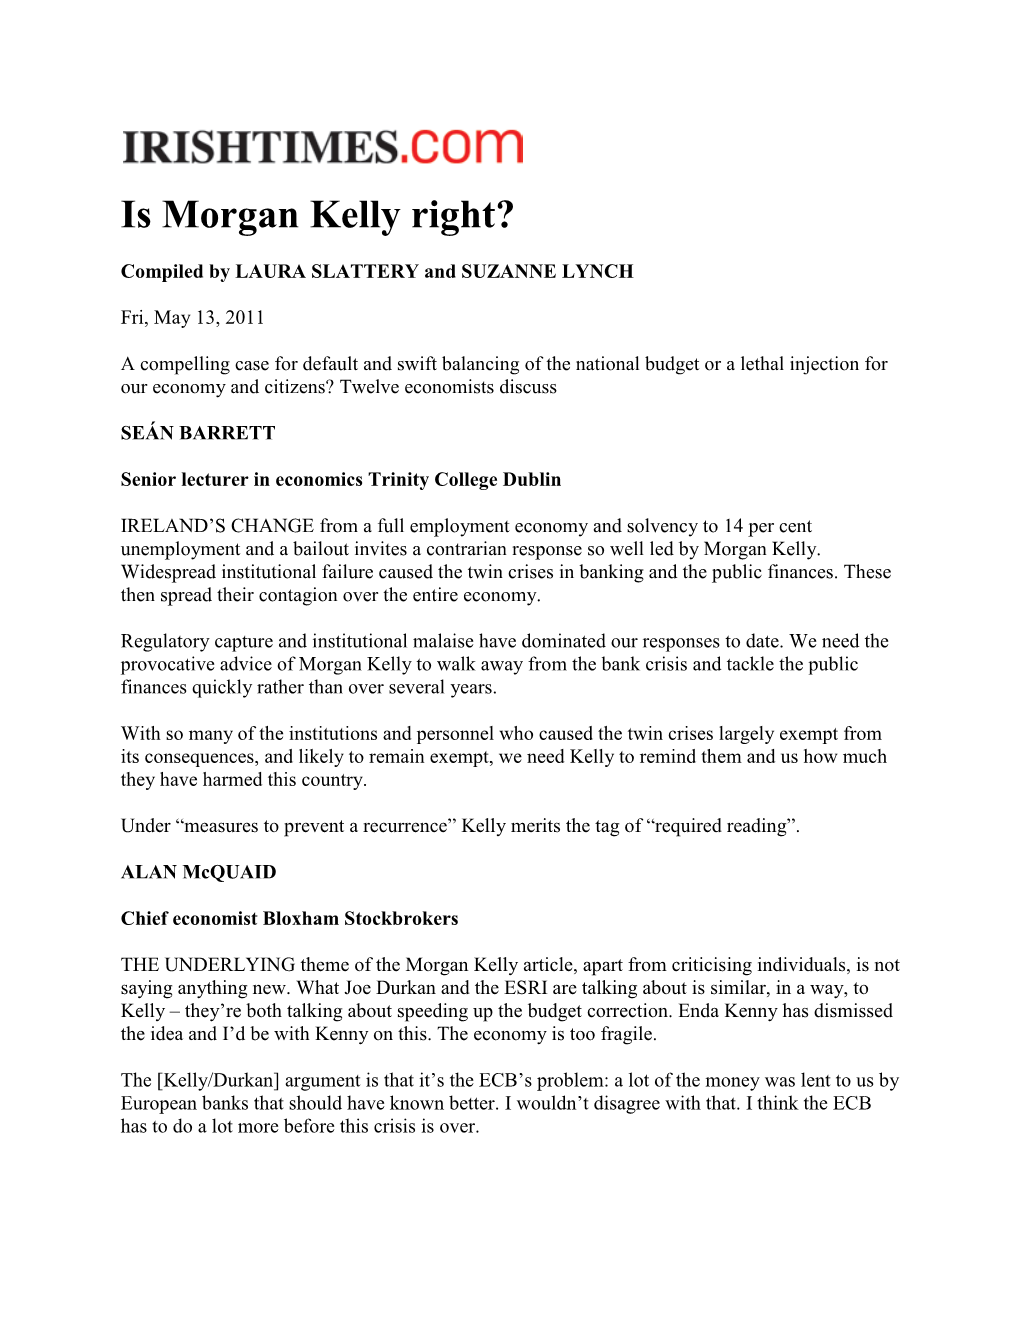 10 Economists Respond to the Question, Is Morgan Kelly Right